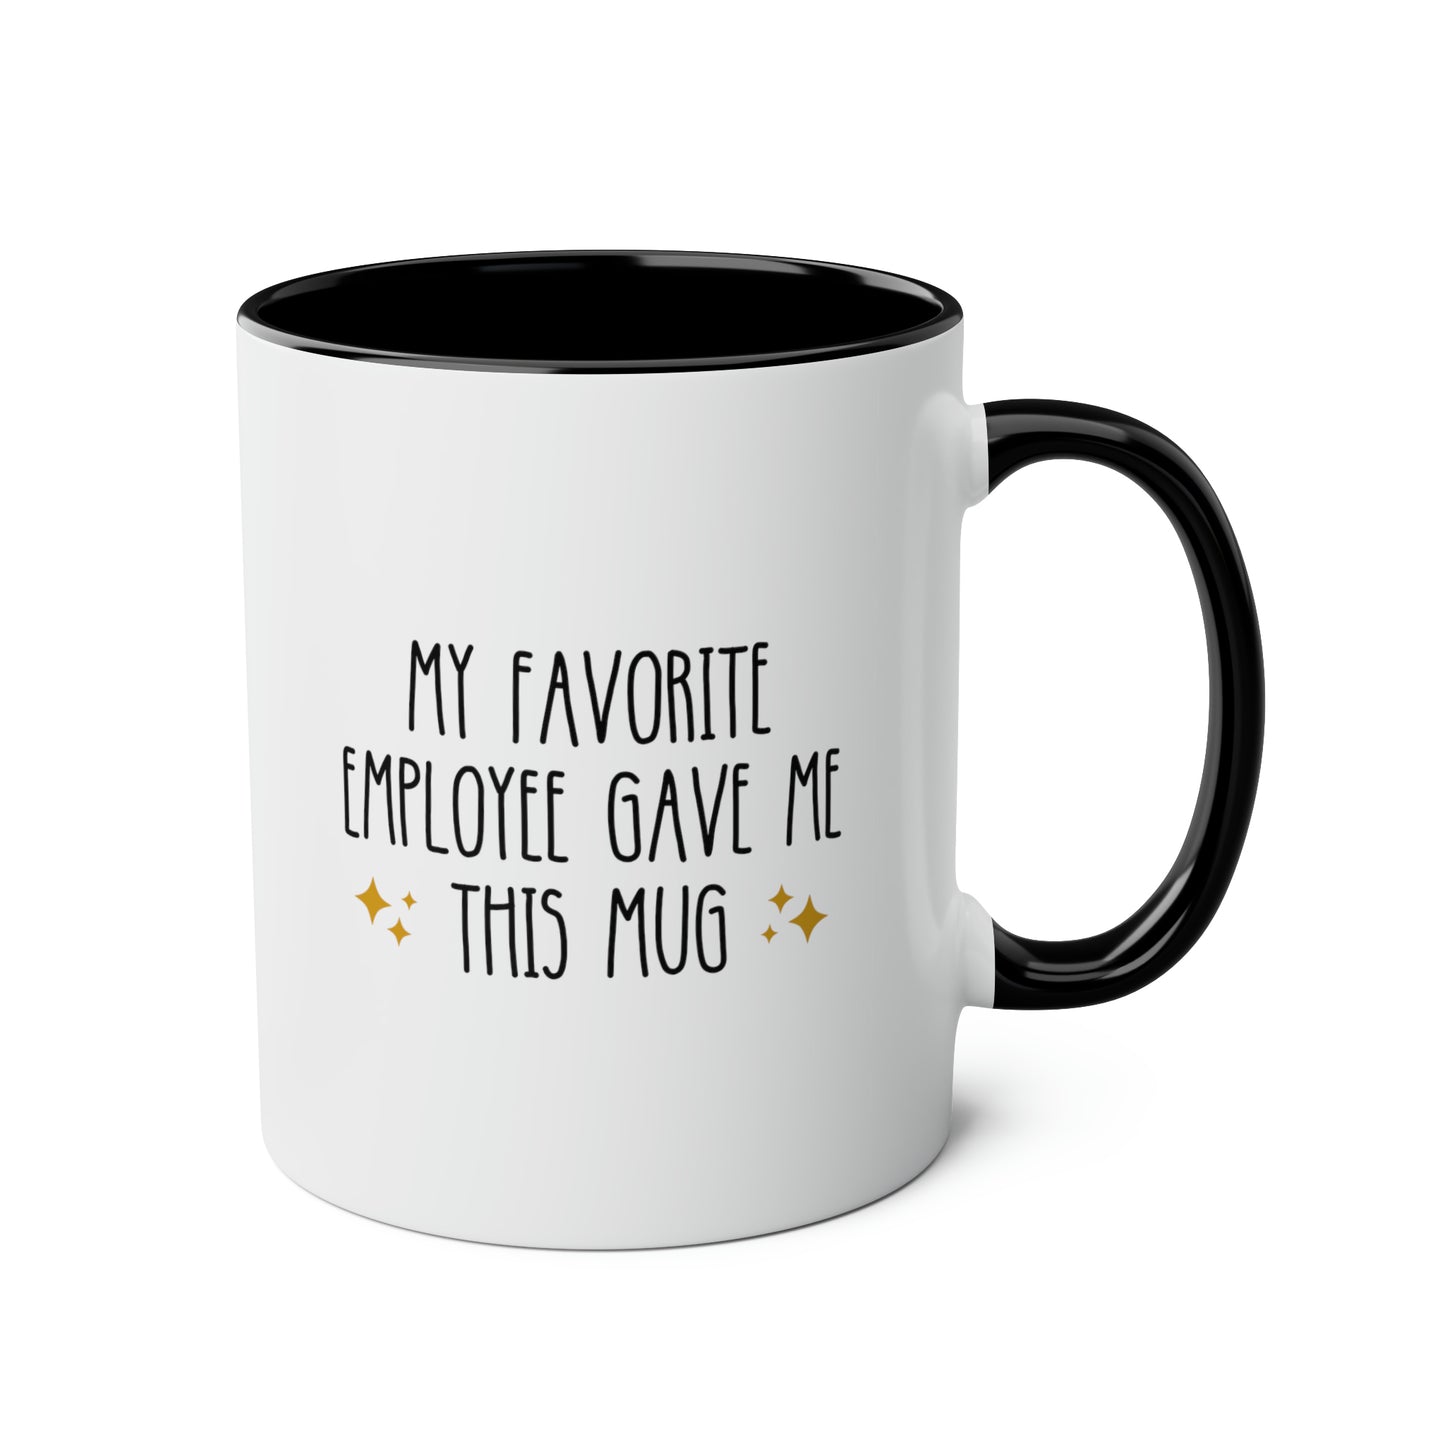 My Favorite Employee Gave Me This Mug 11oz white with black accent funny large coffee mug gift for boss work office cup manager team leader best ever waveywares wavey wares wavywares wavy wares